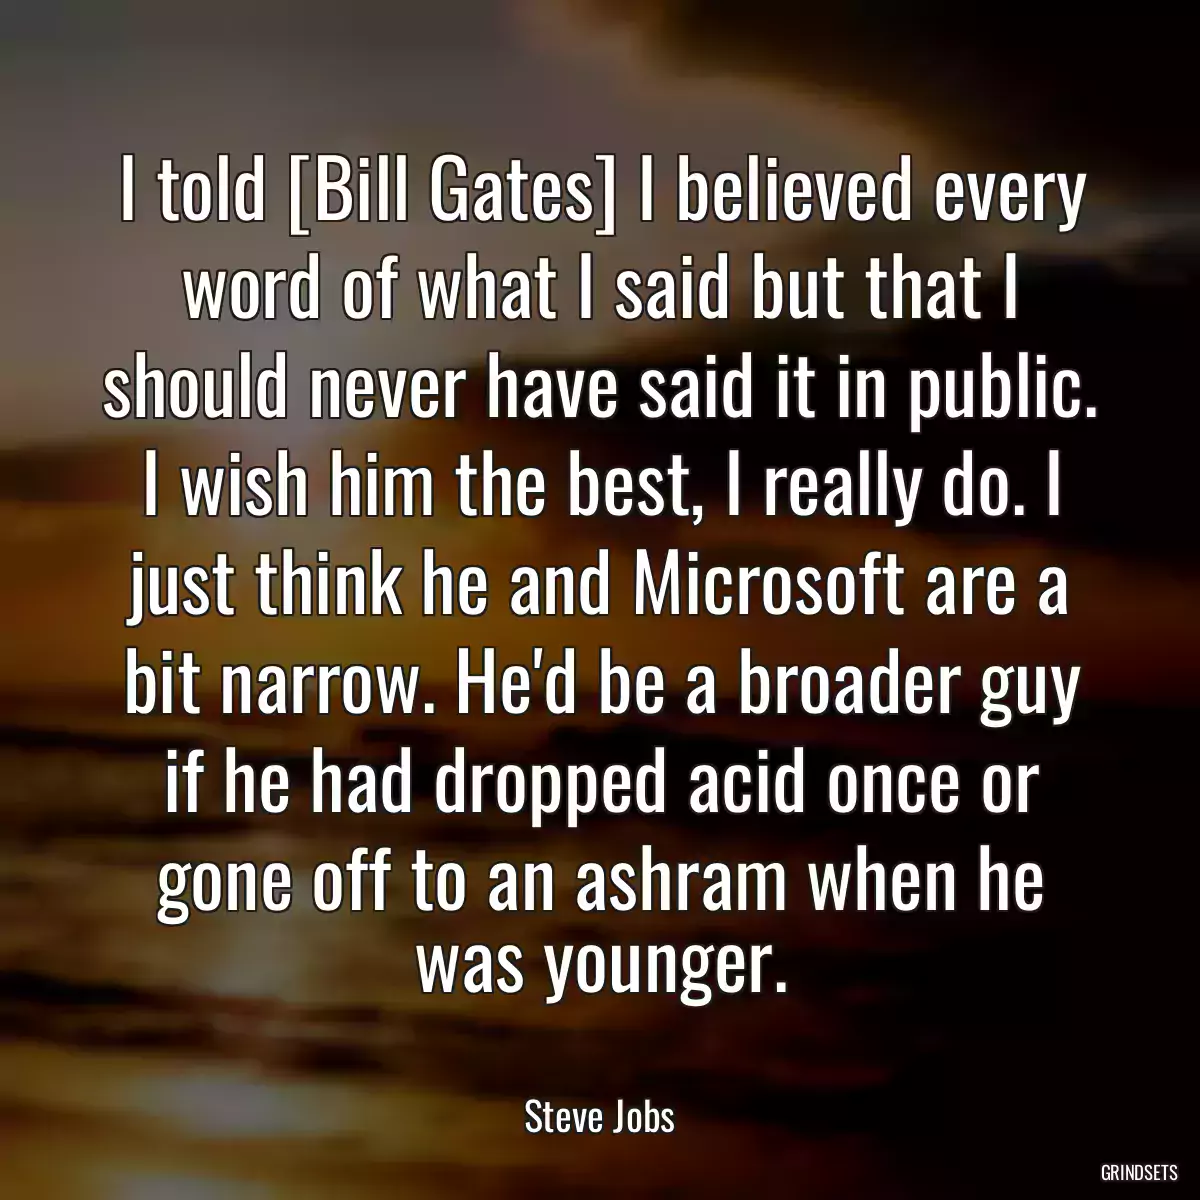 I told [Bill Gates] I believed every word of what I said but that I should never have said it in public. I wish him the best, I really do. I just think he and Microsoft are a bit narrow. He\'d be a broader guy if he had dropped acid once or gone off to an ashram when he was younger.